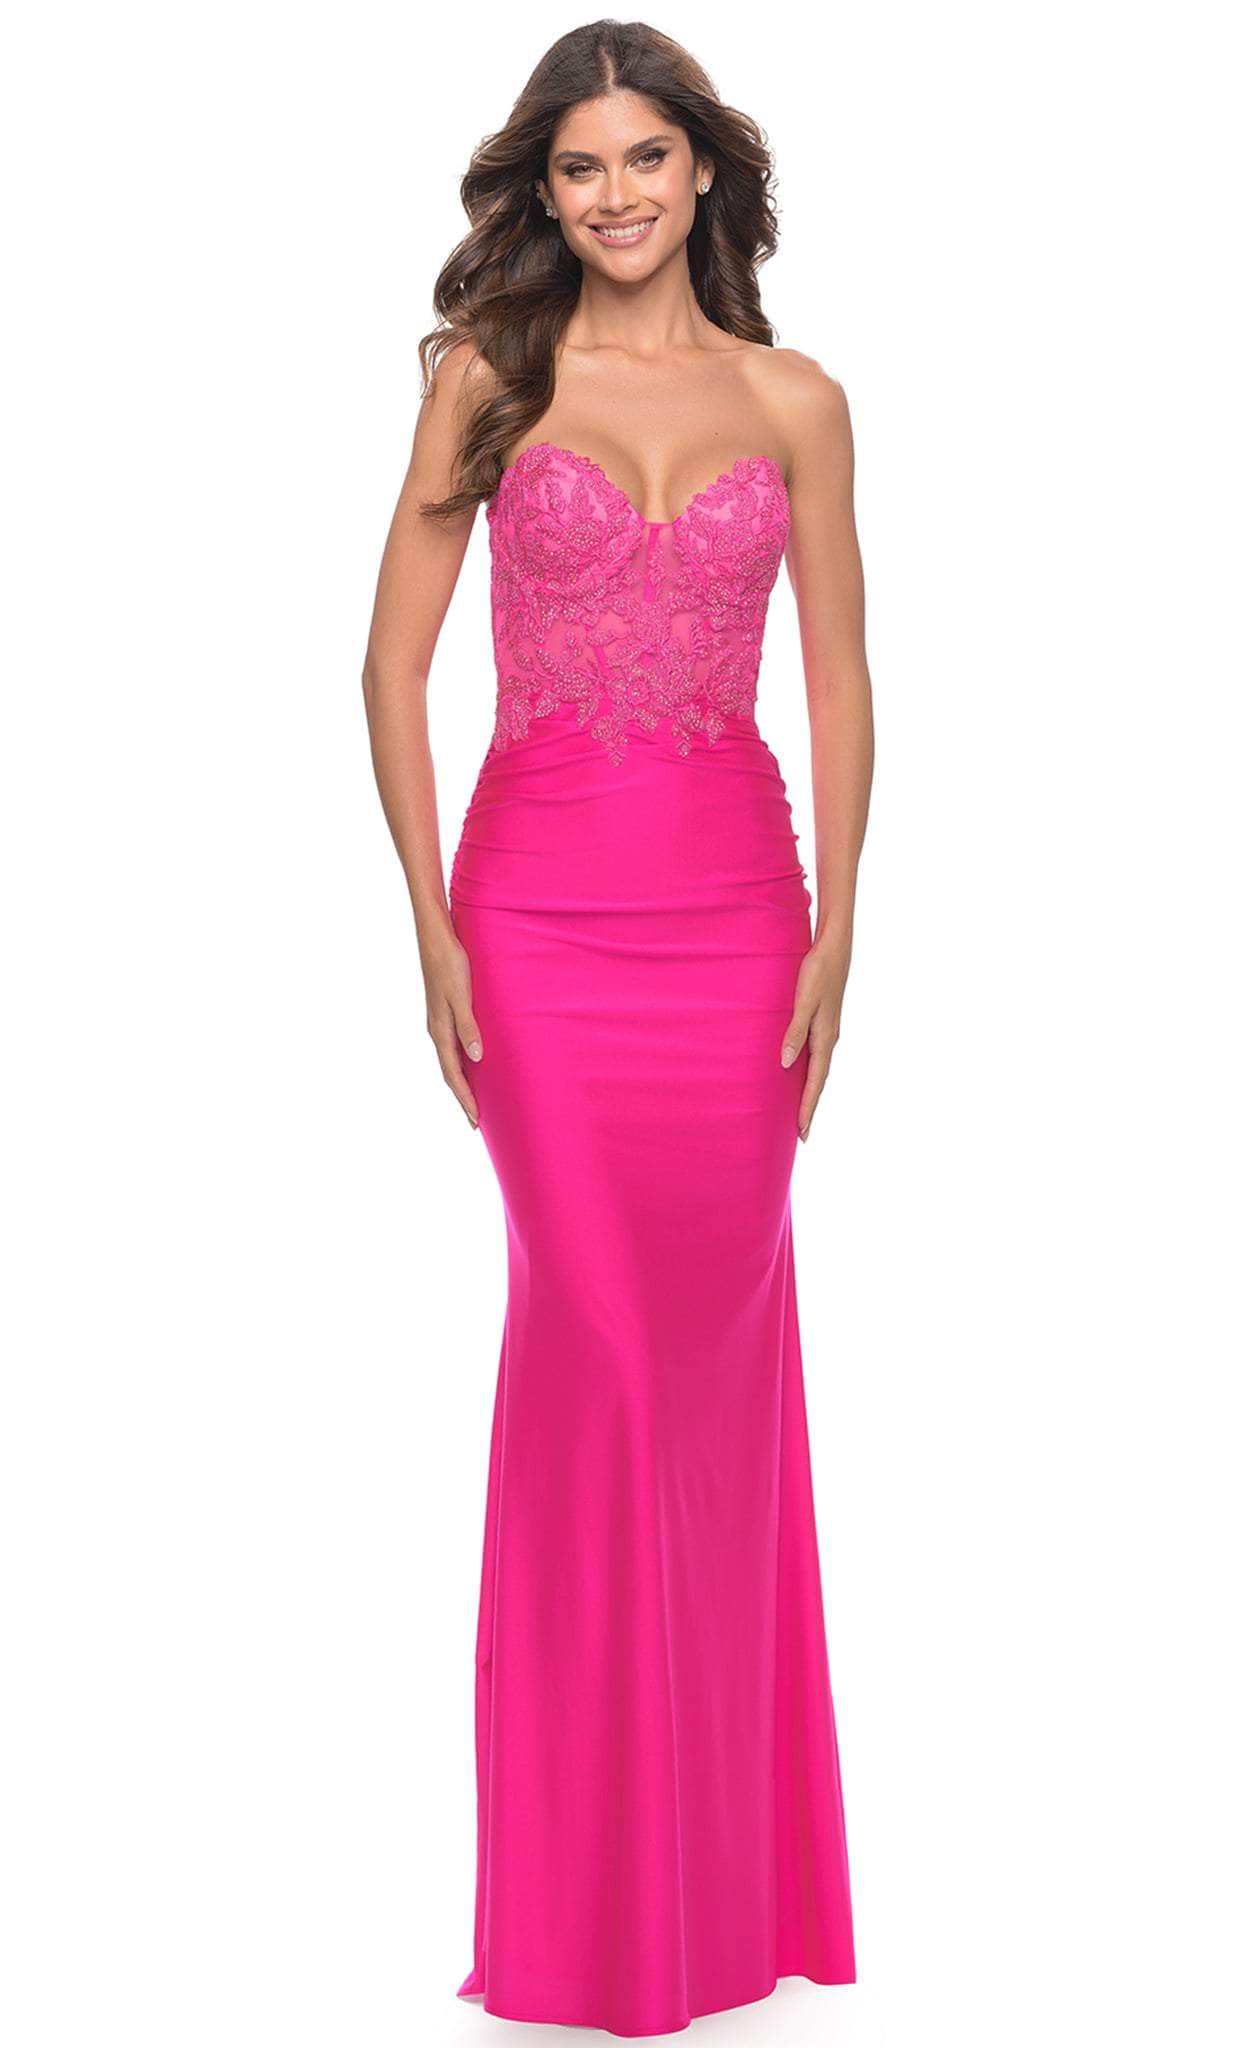 La Femme 30696 - Embroidered Lace Strapless Gown
